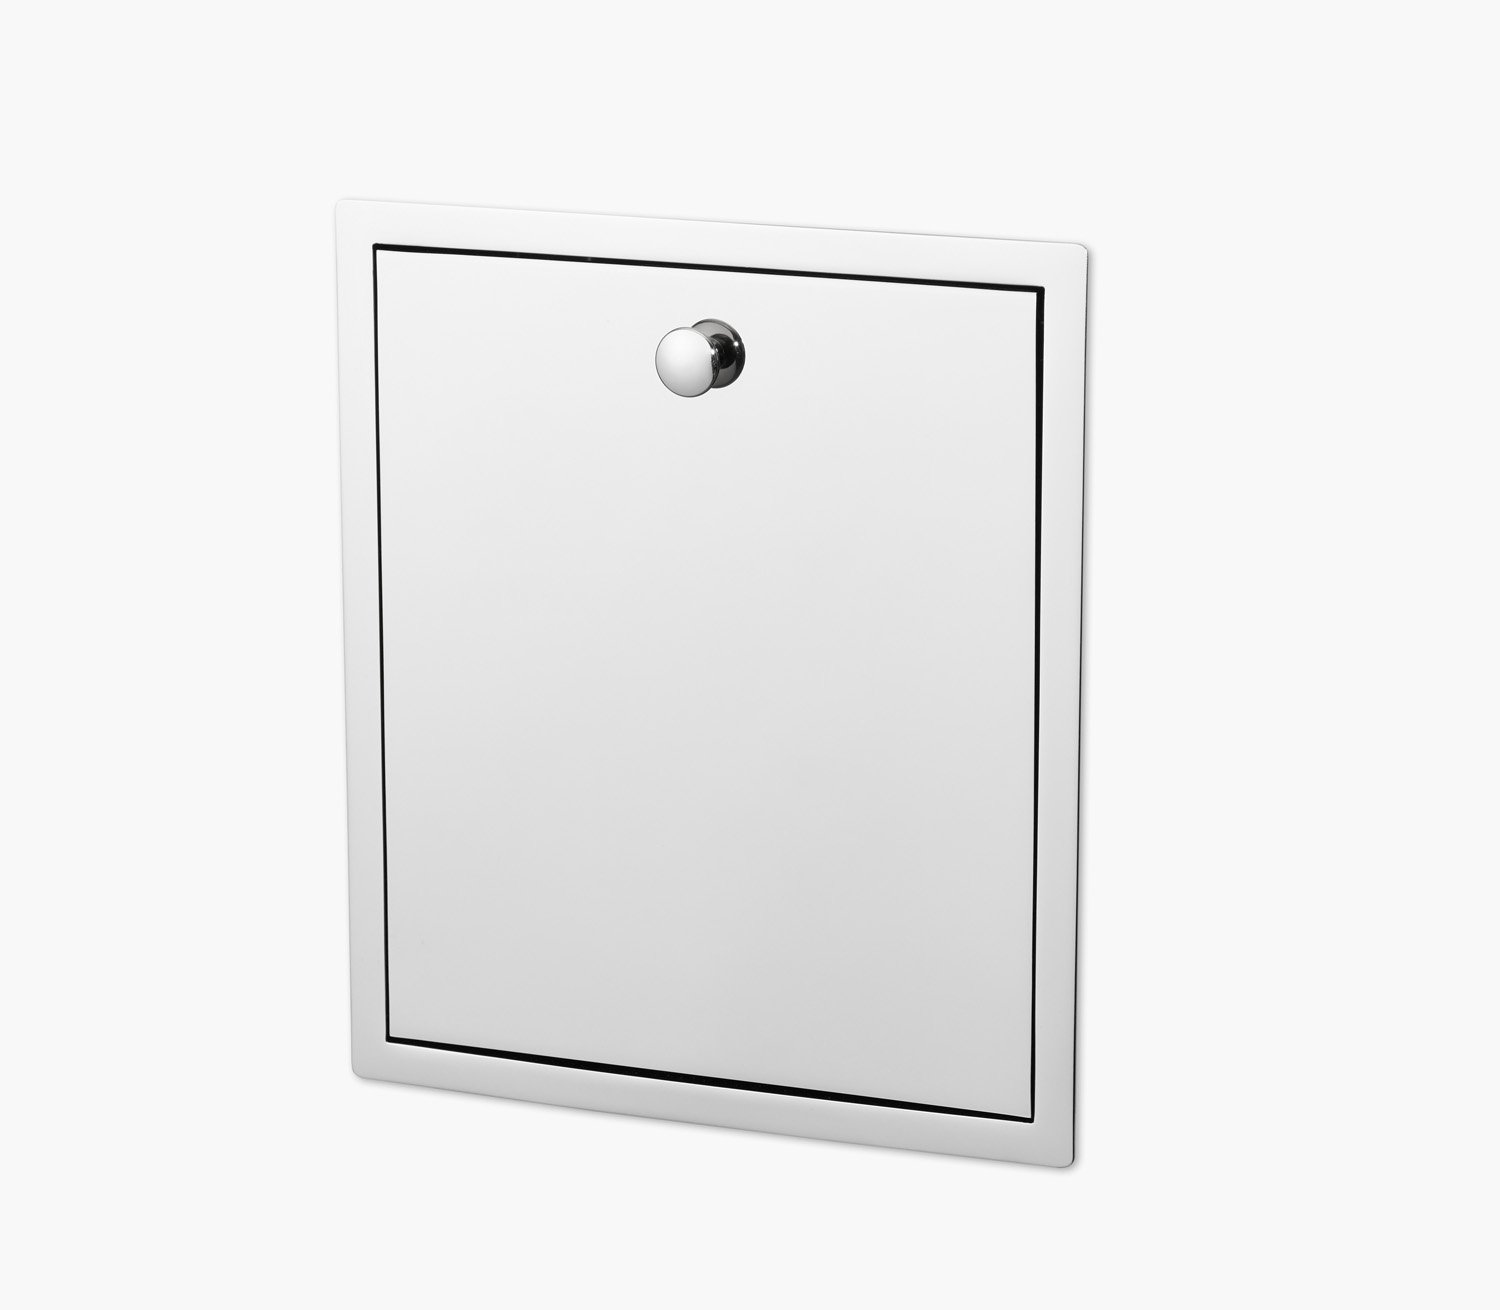 Wall Recessed Waste Bin Product Image 1